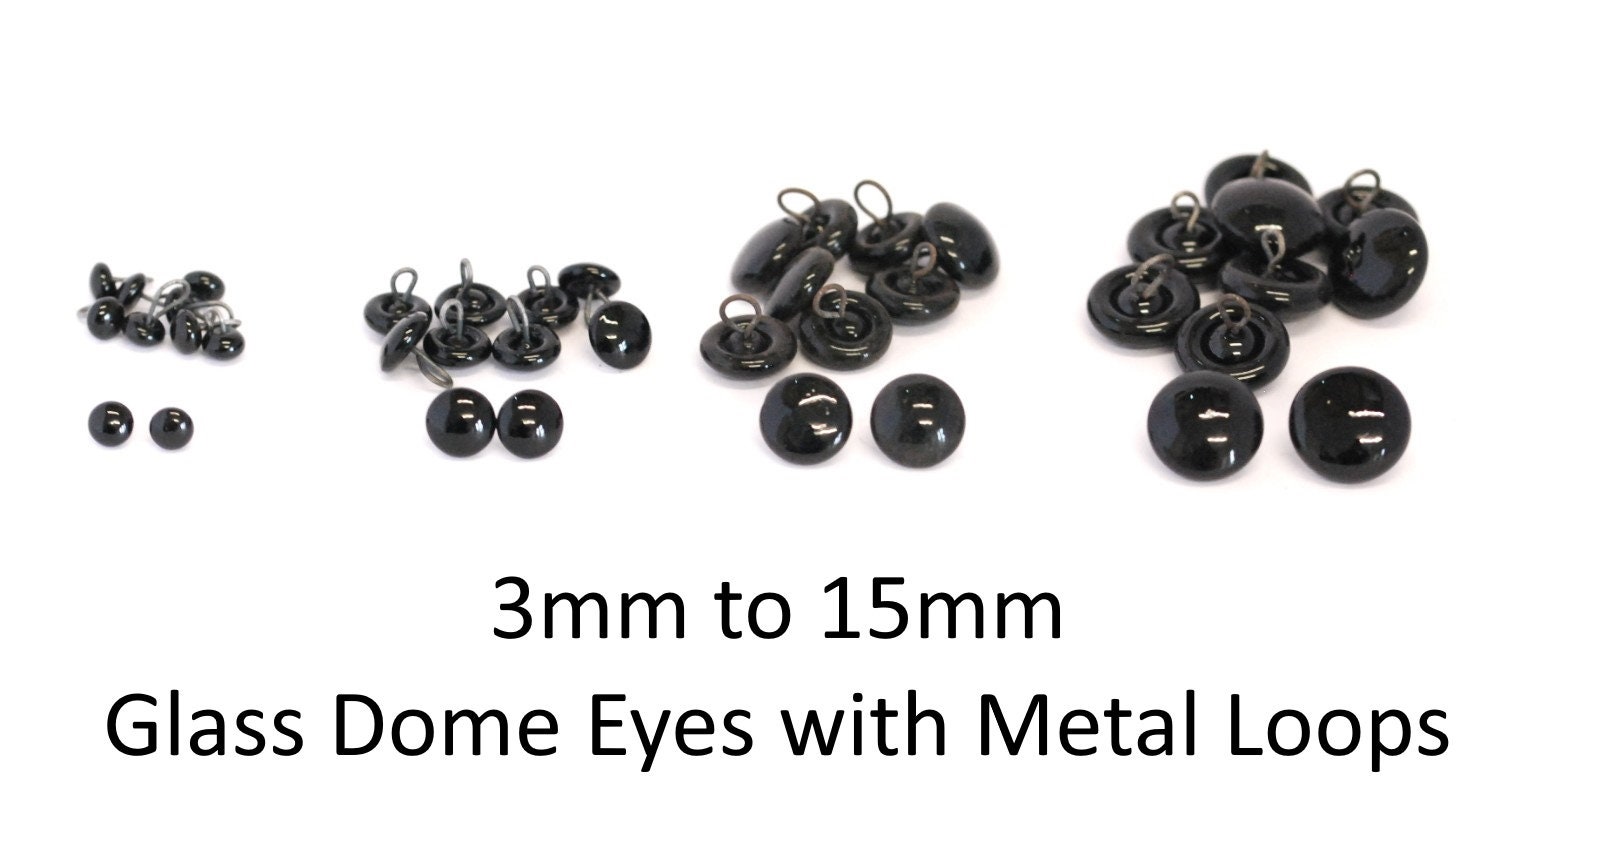 BLACK Safety Eyes, Available in 14 Different Sizes 4.5mm to 24mm Amigurumi  Safety Eyes, Teddy Bear Eyes, Craft Safety Eyes -  Norway